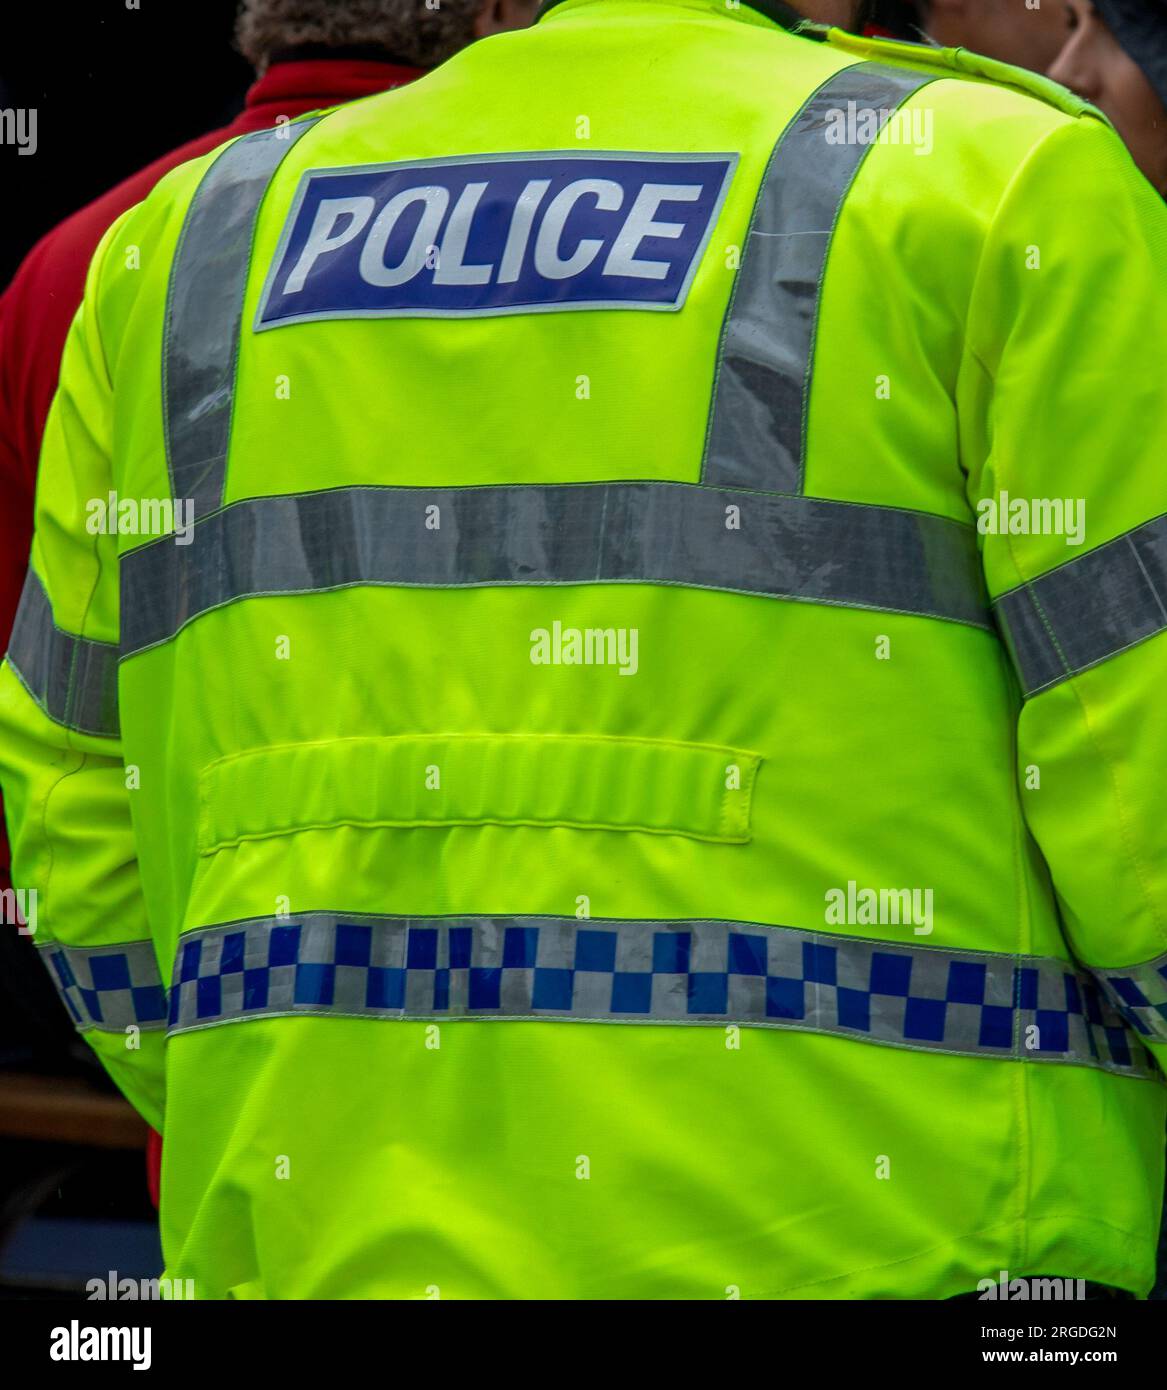 Police high visibility jacket, policeman on duty Stock Photo